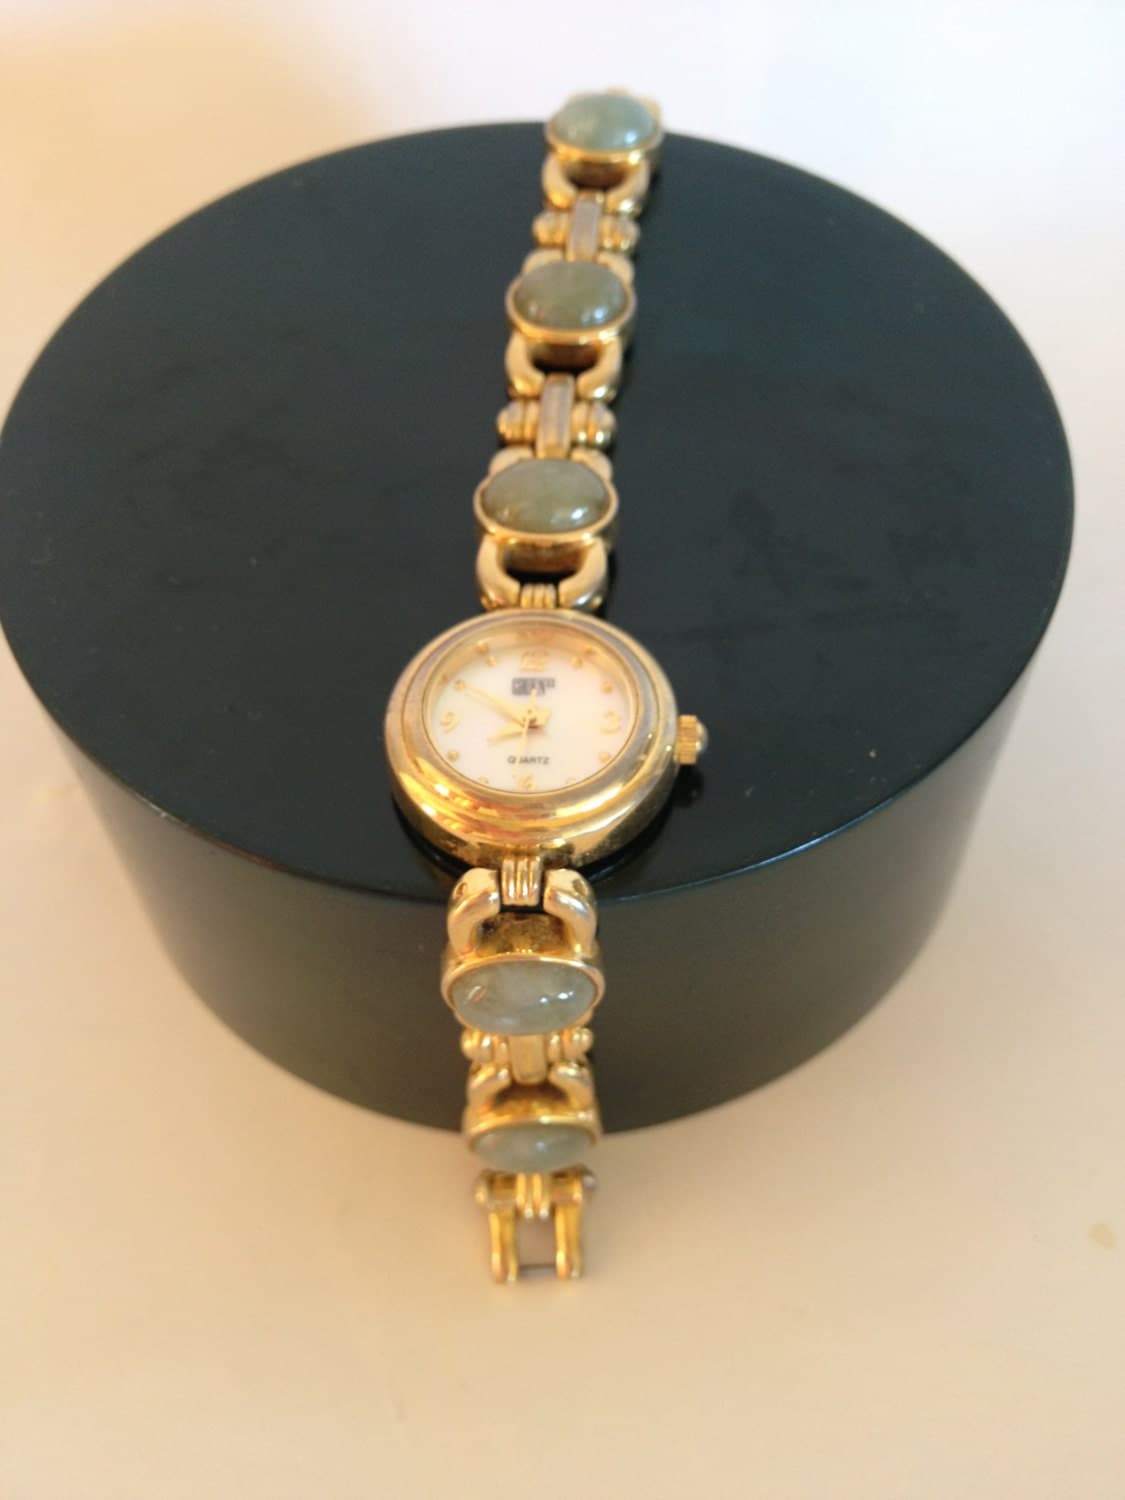 Gruen II Ladies Watch with jade and goldtone clasping band